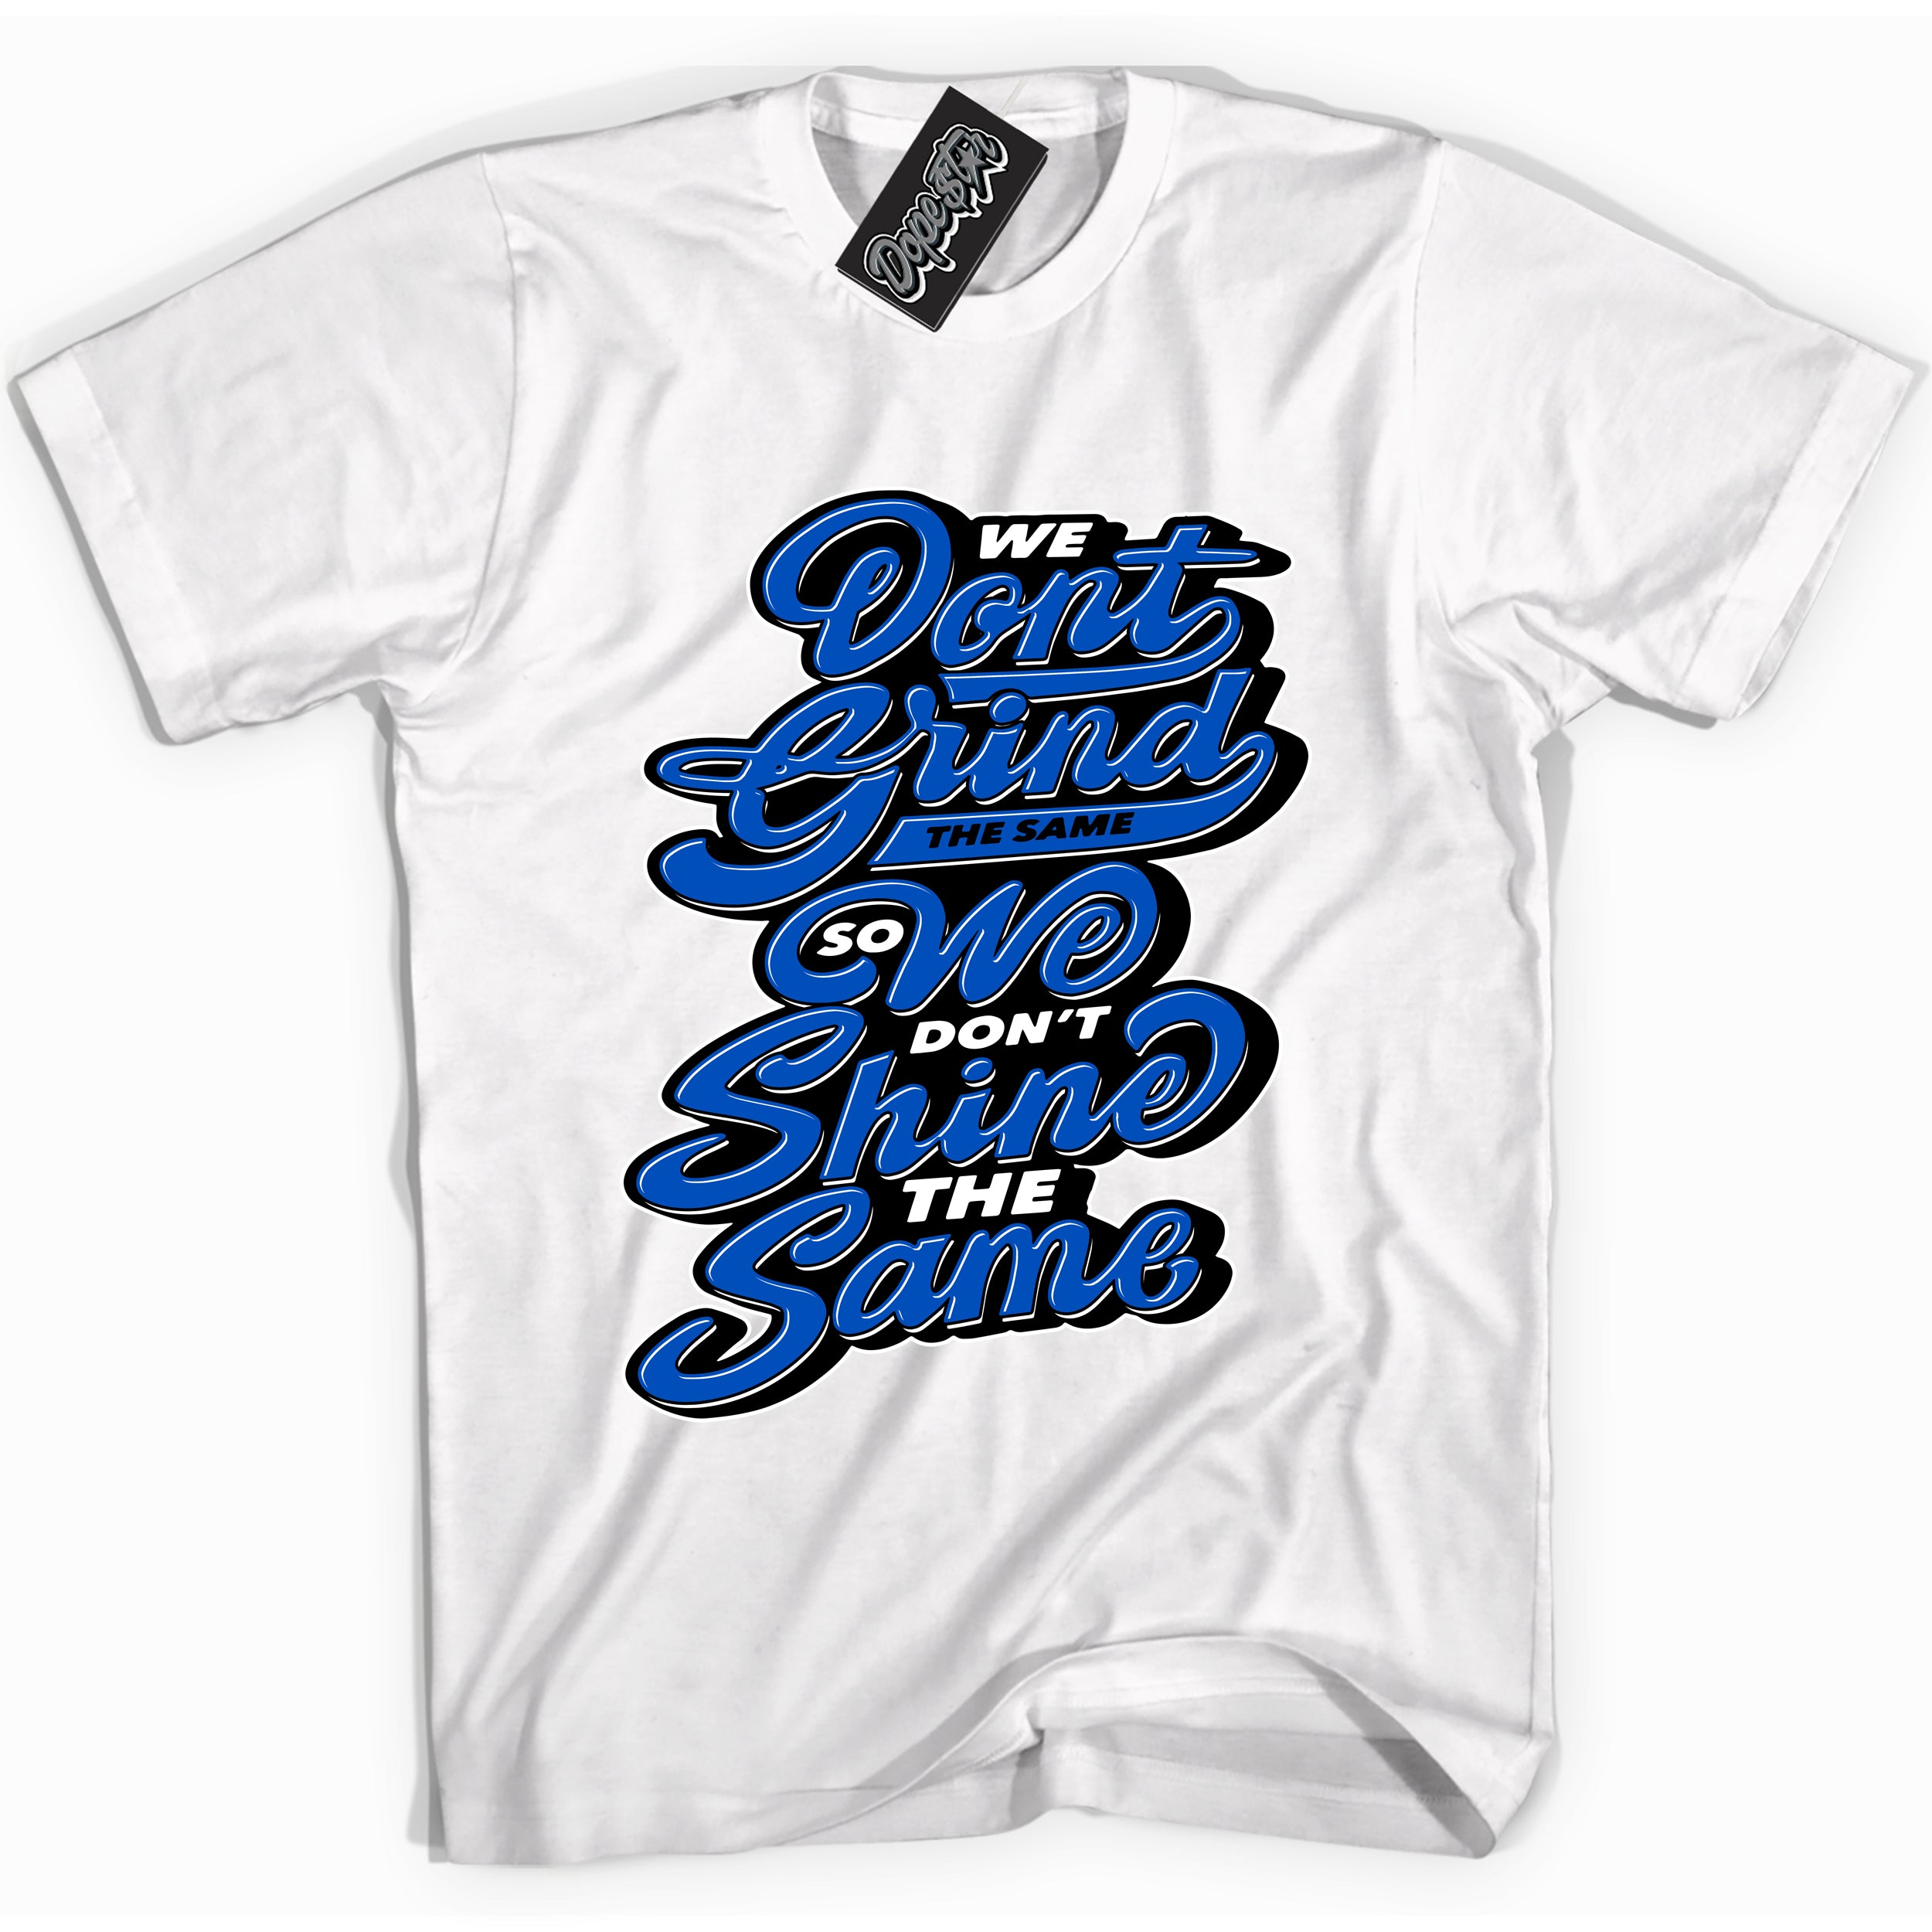 Cool White graphic tee with Grind Shine print, that perfectly matches OG Royal Reimagined 1s sneakers 